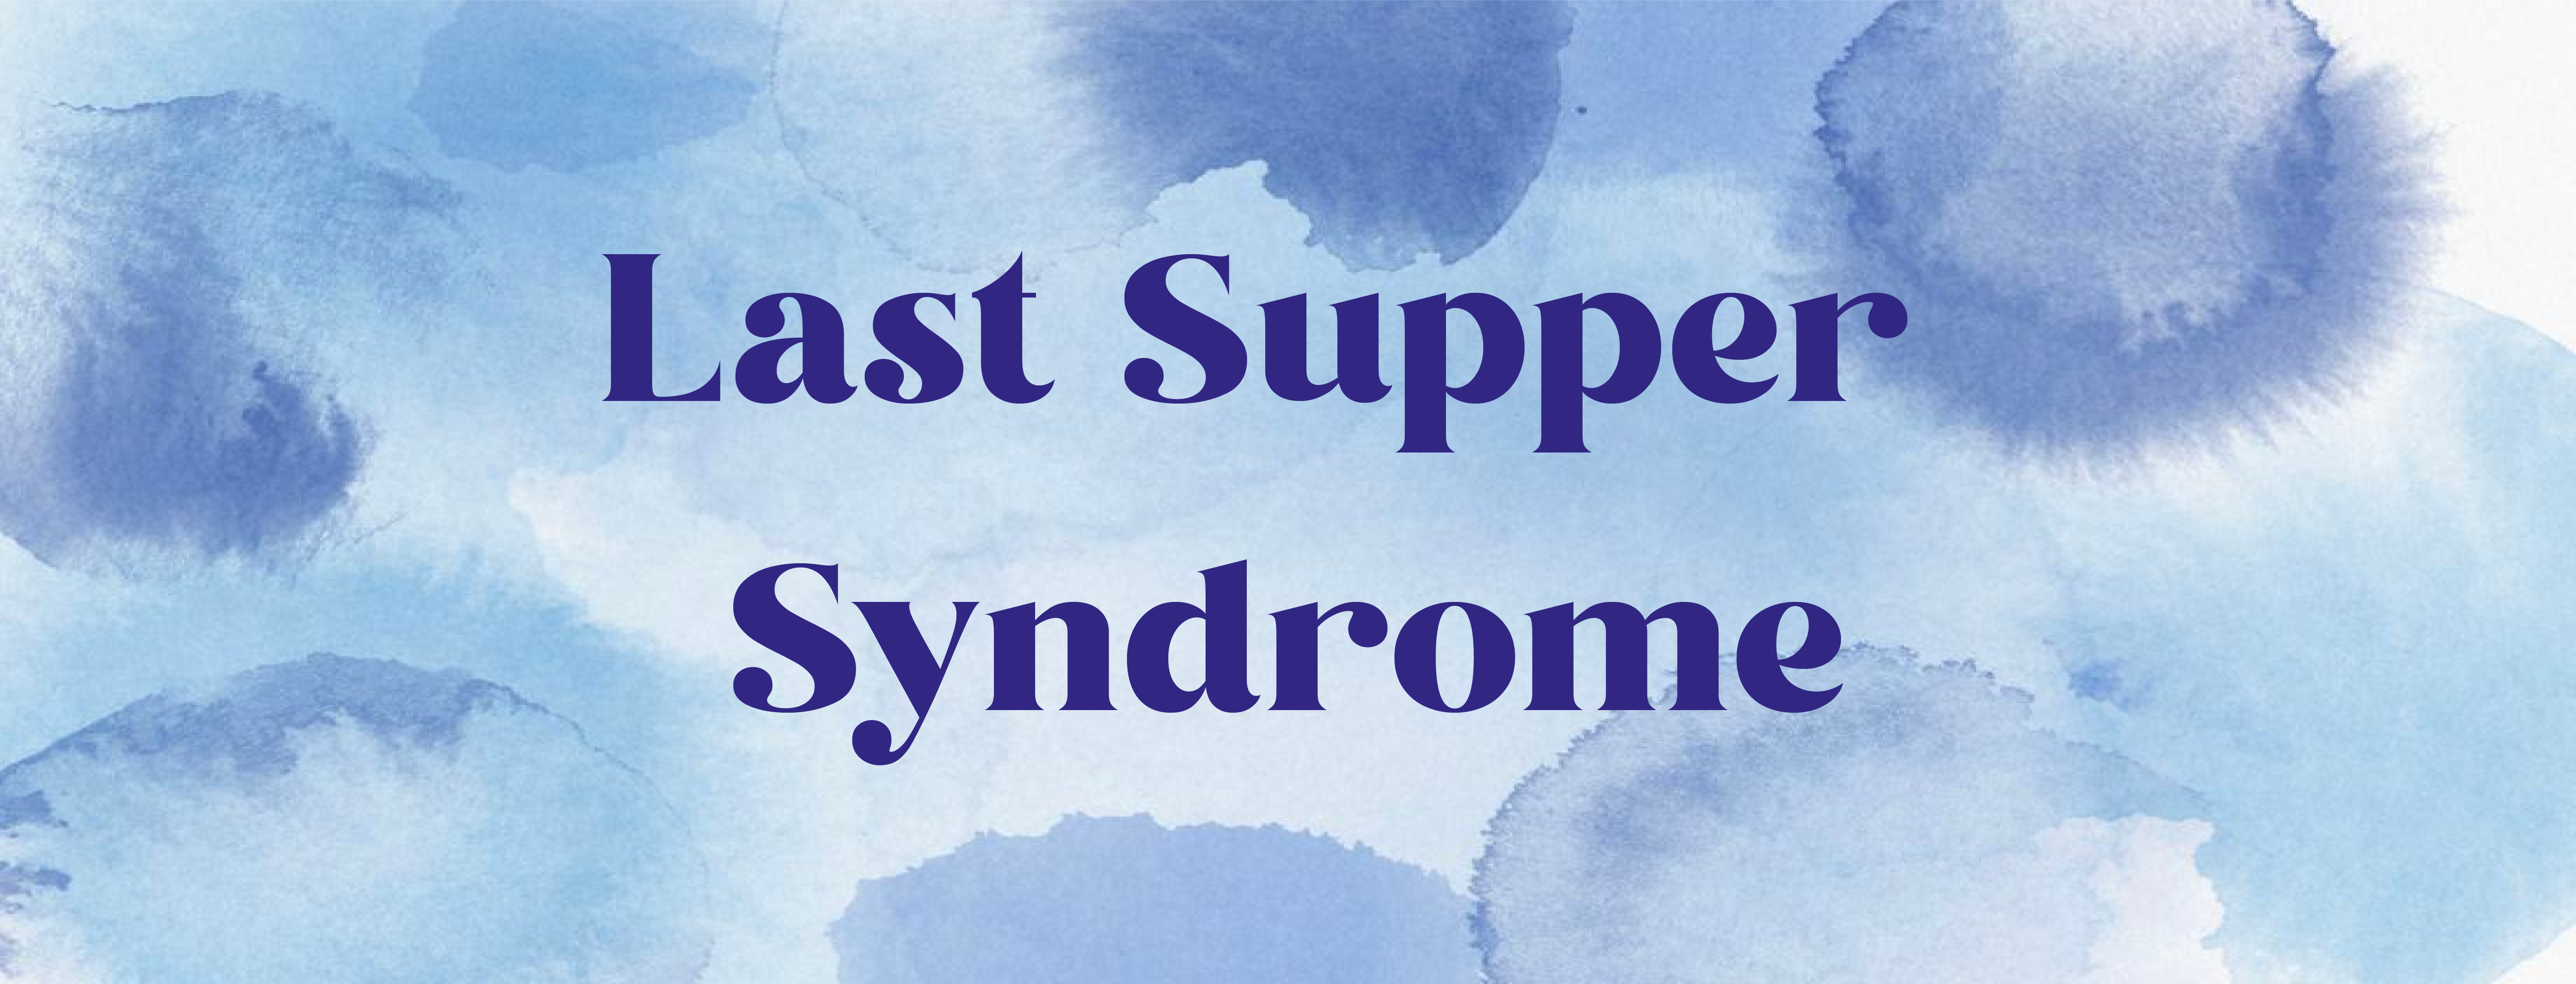 Last supper syndrome